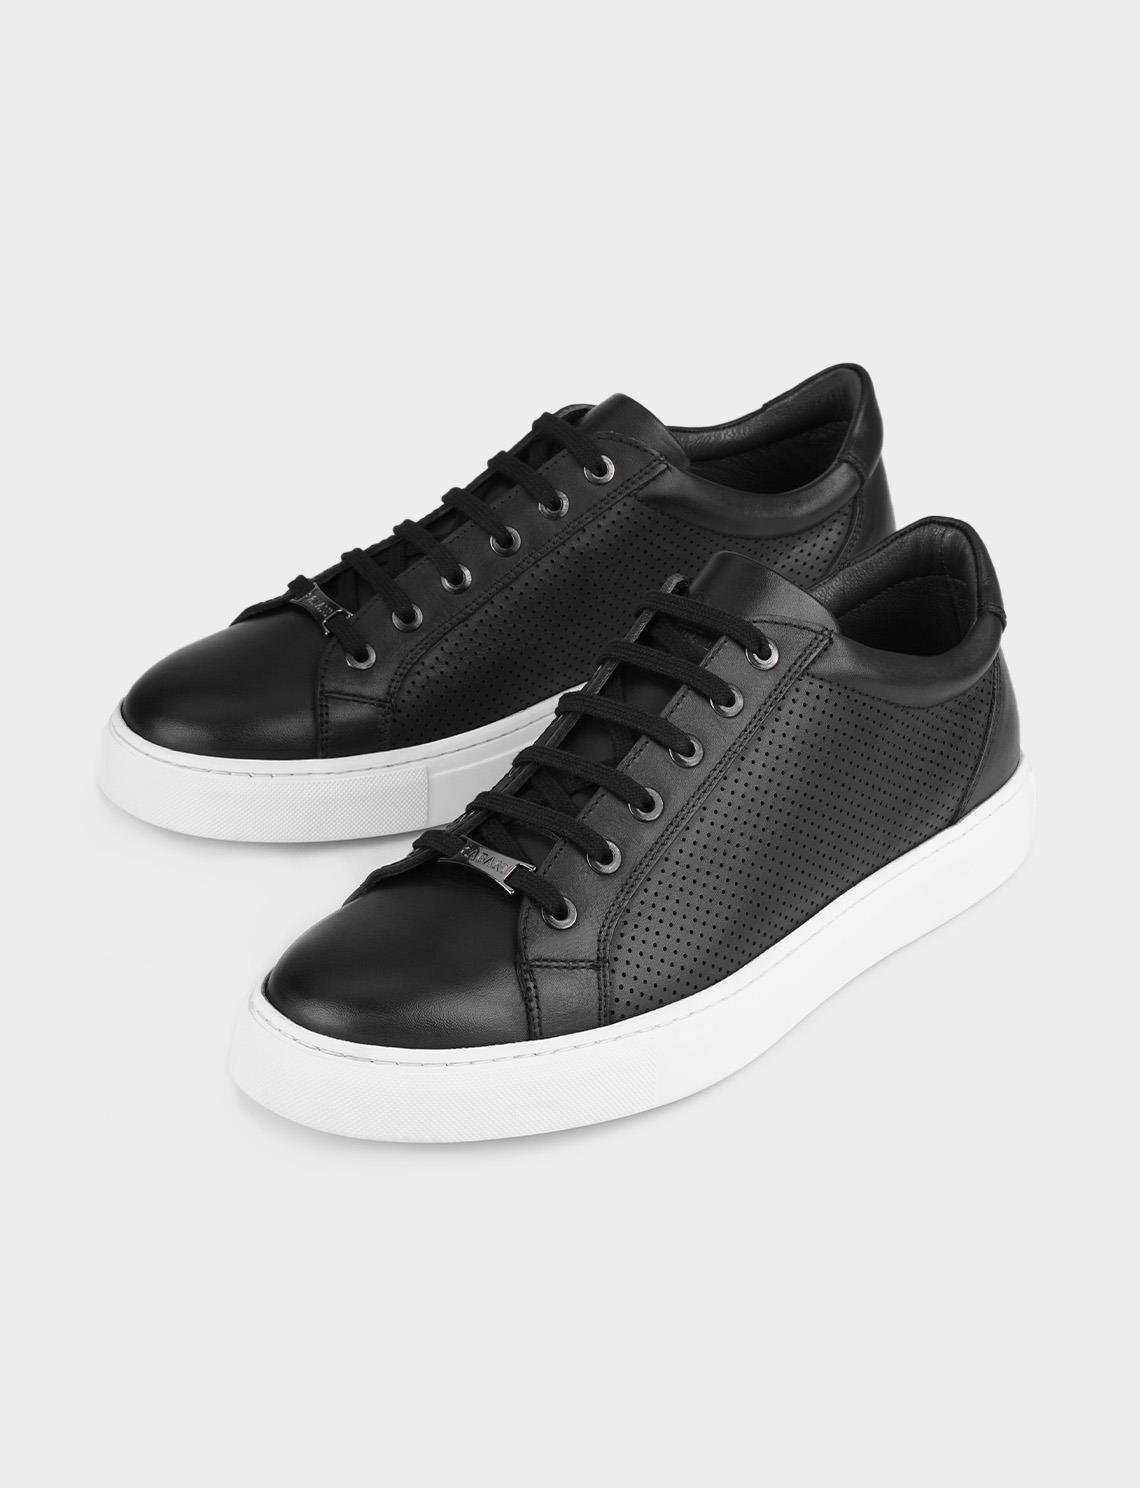 Men Black Genuine Leather Lace Up Low Top Sneakers